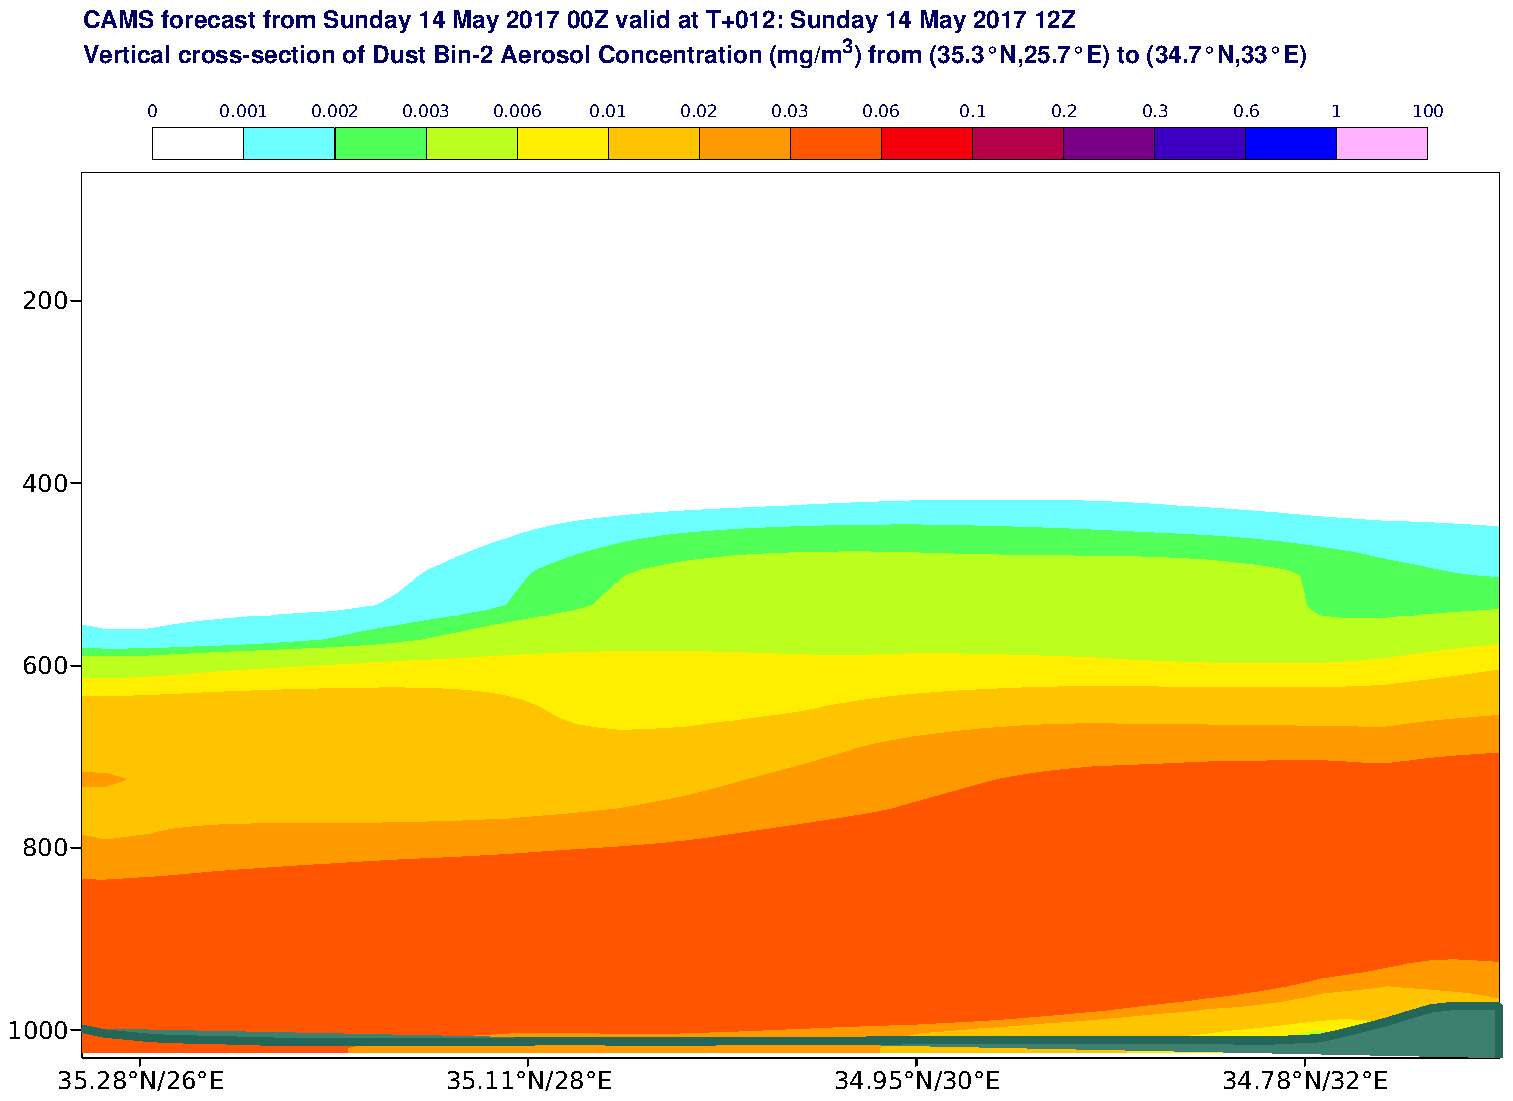 Vertical cross-section of Dust Bin-2 Aerosol Concentration (mg/m3) valid at T12 - 2017-05-14 12:00